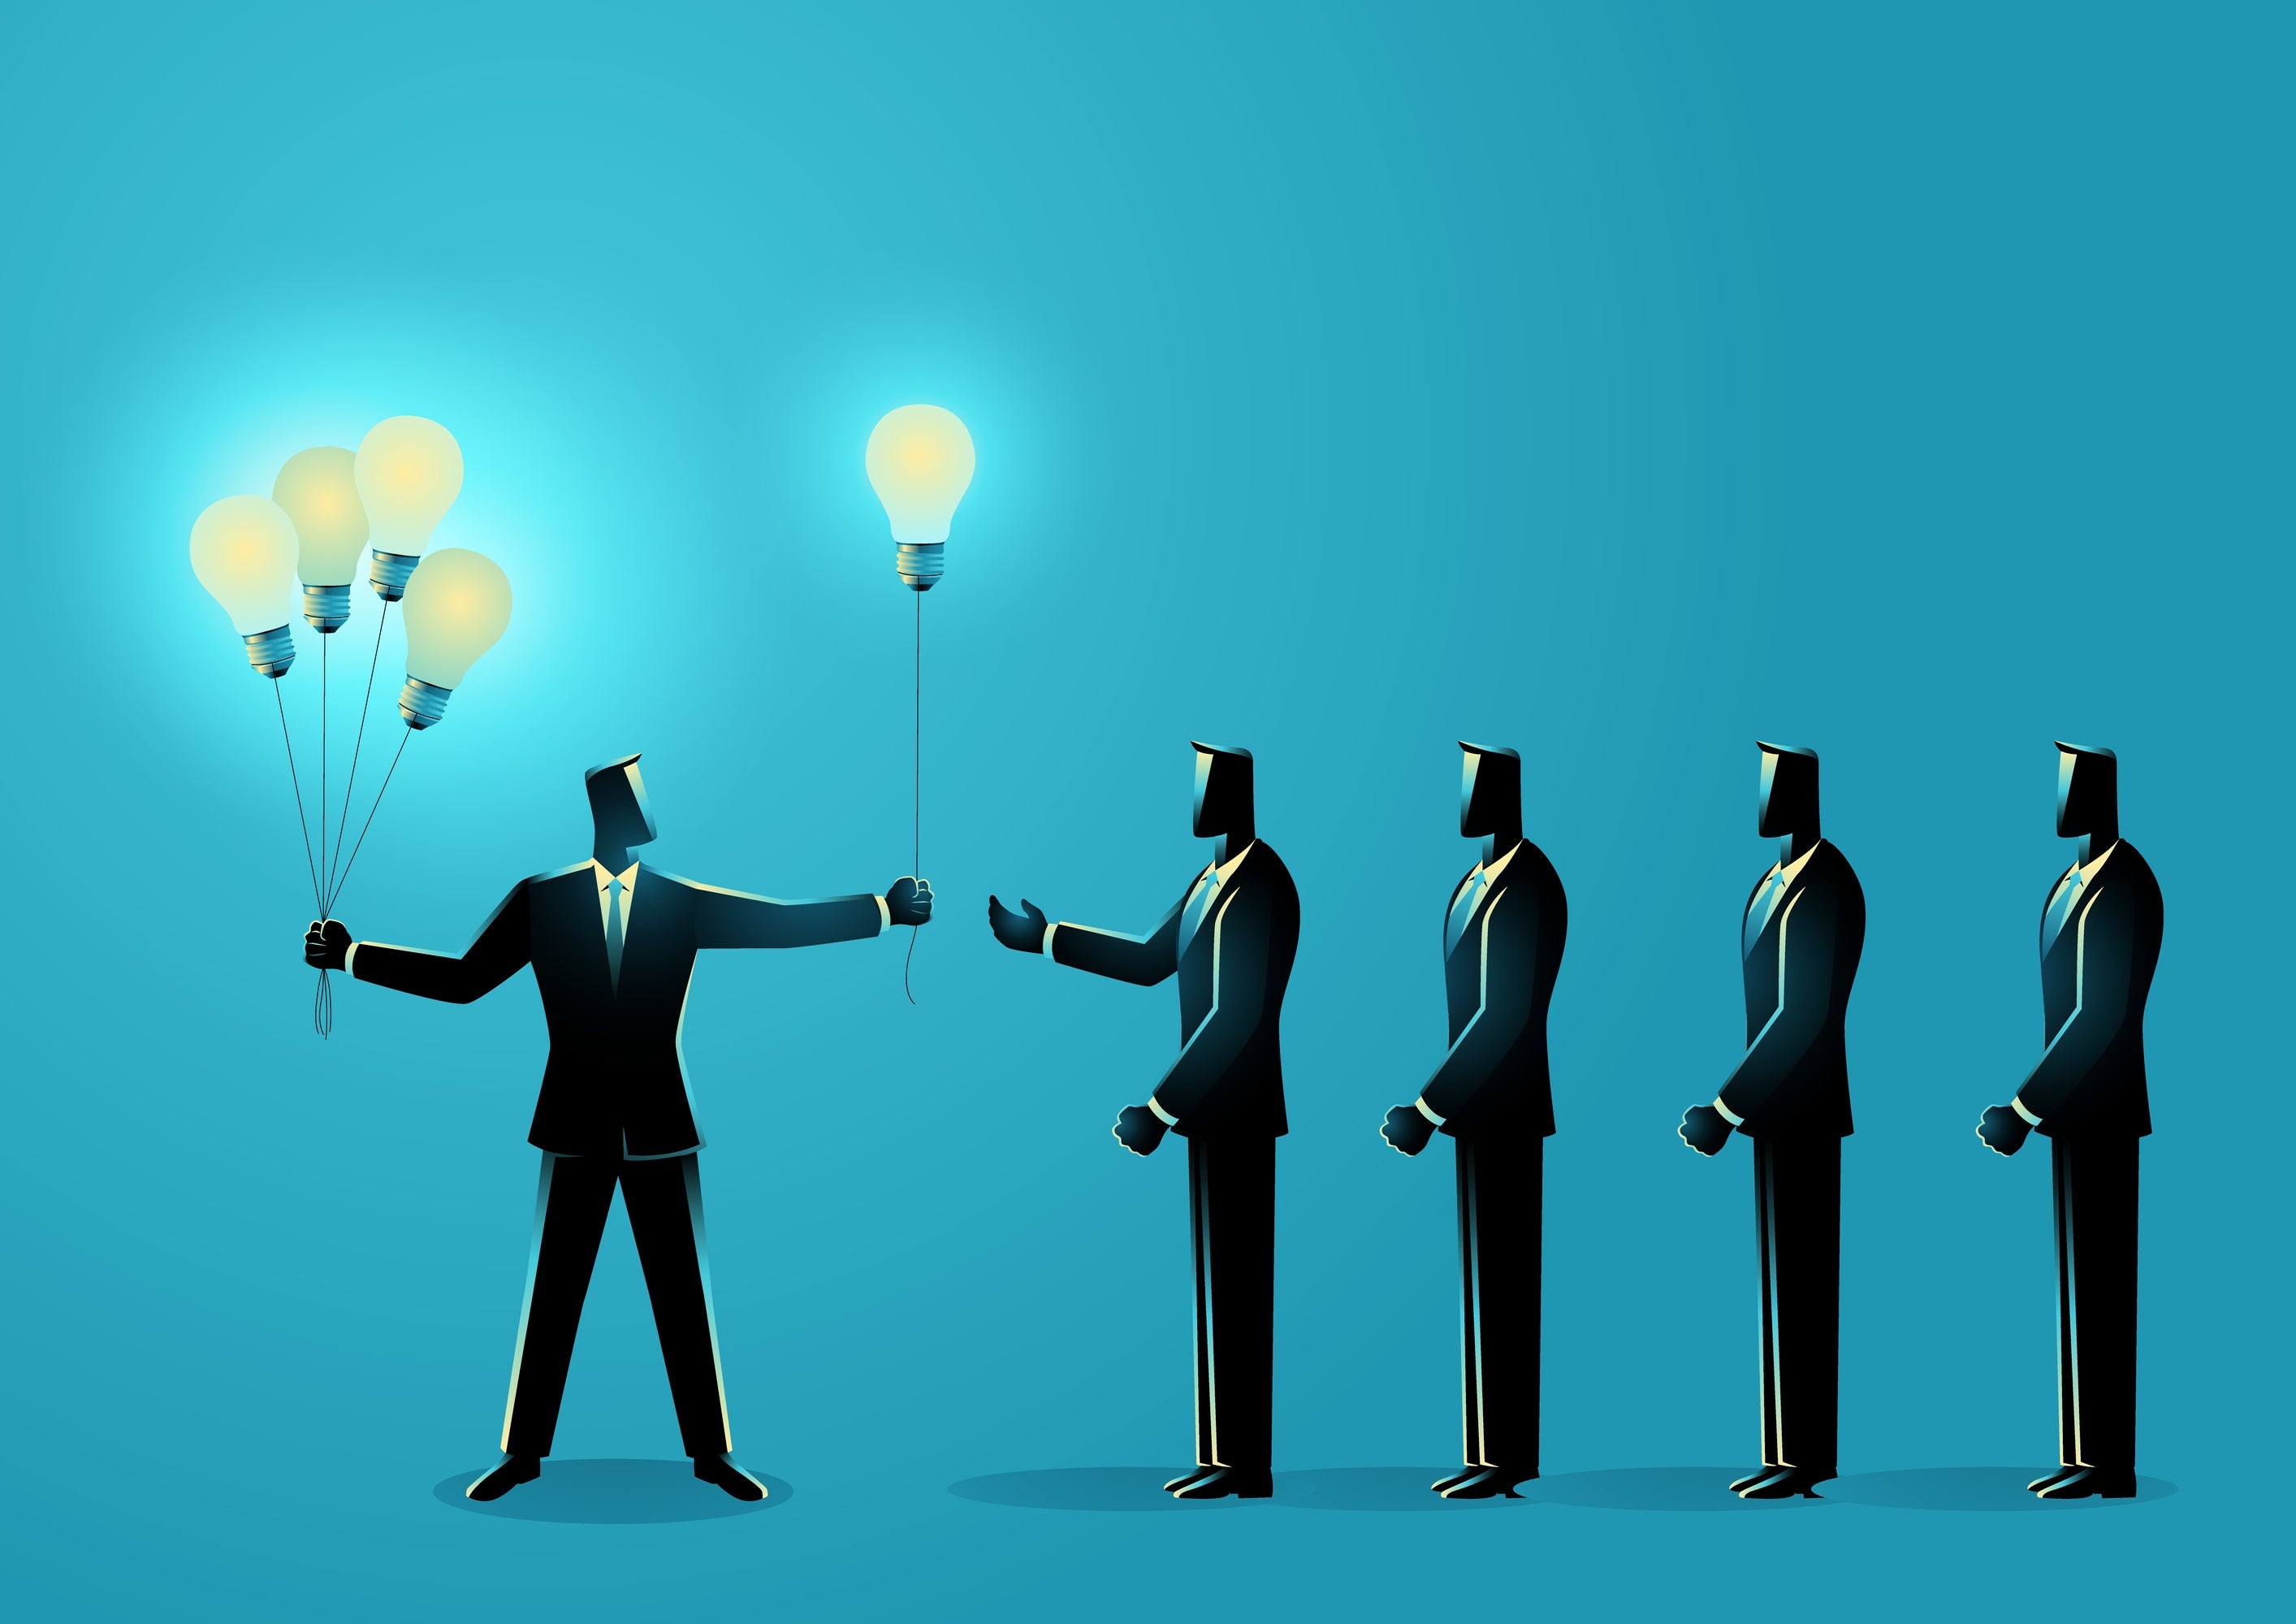 Businessman sharing knowledge to other businessmen symbolized by light bulb balloons.